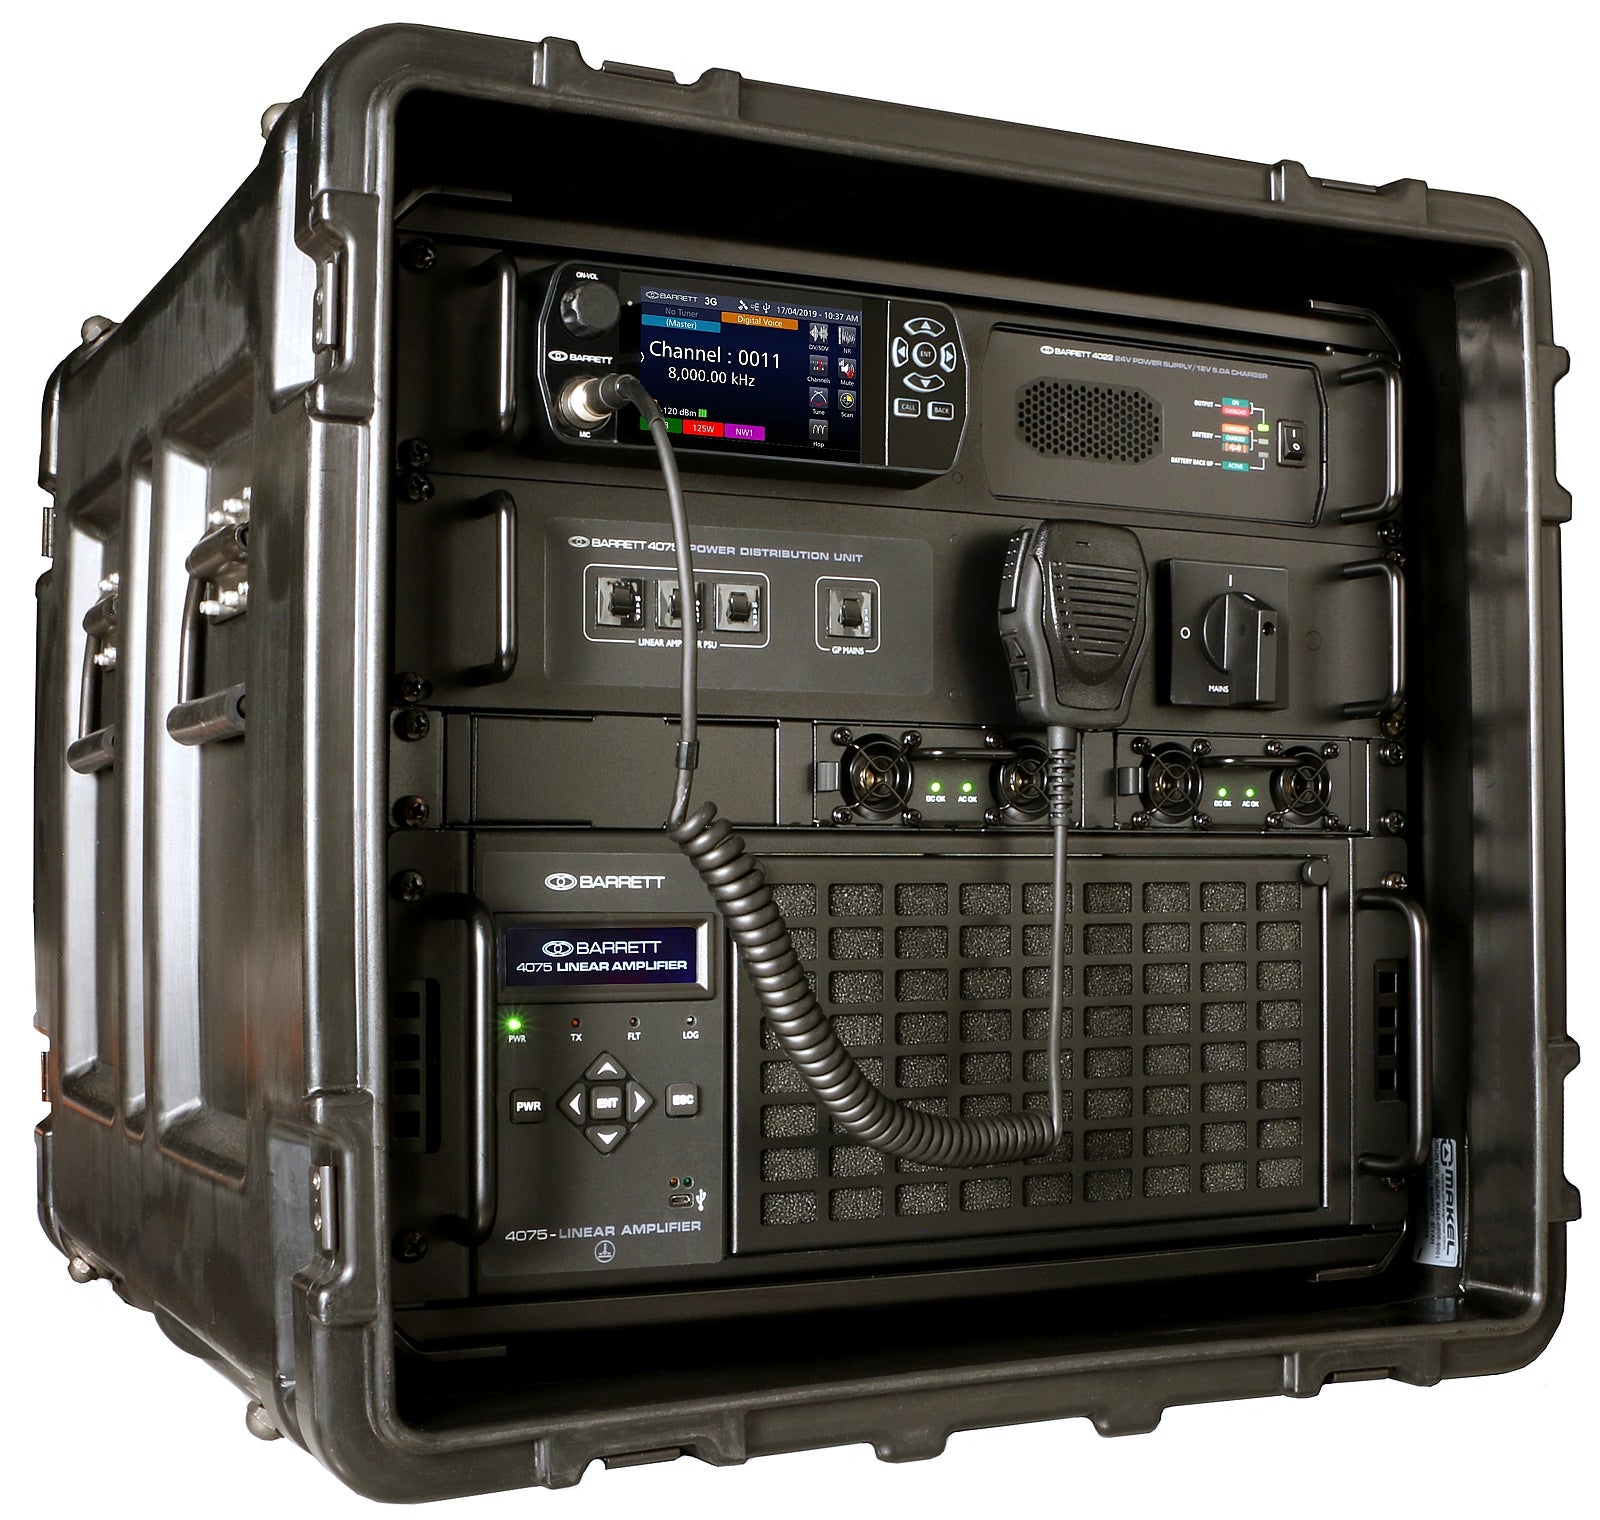 The case for HF radio in building a resilient, always-on communications infrastructure